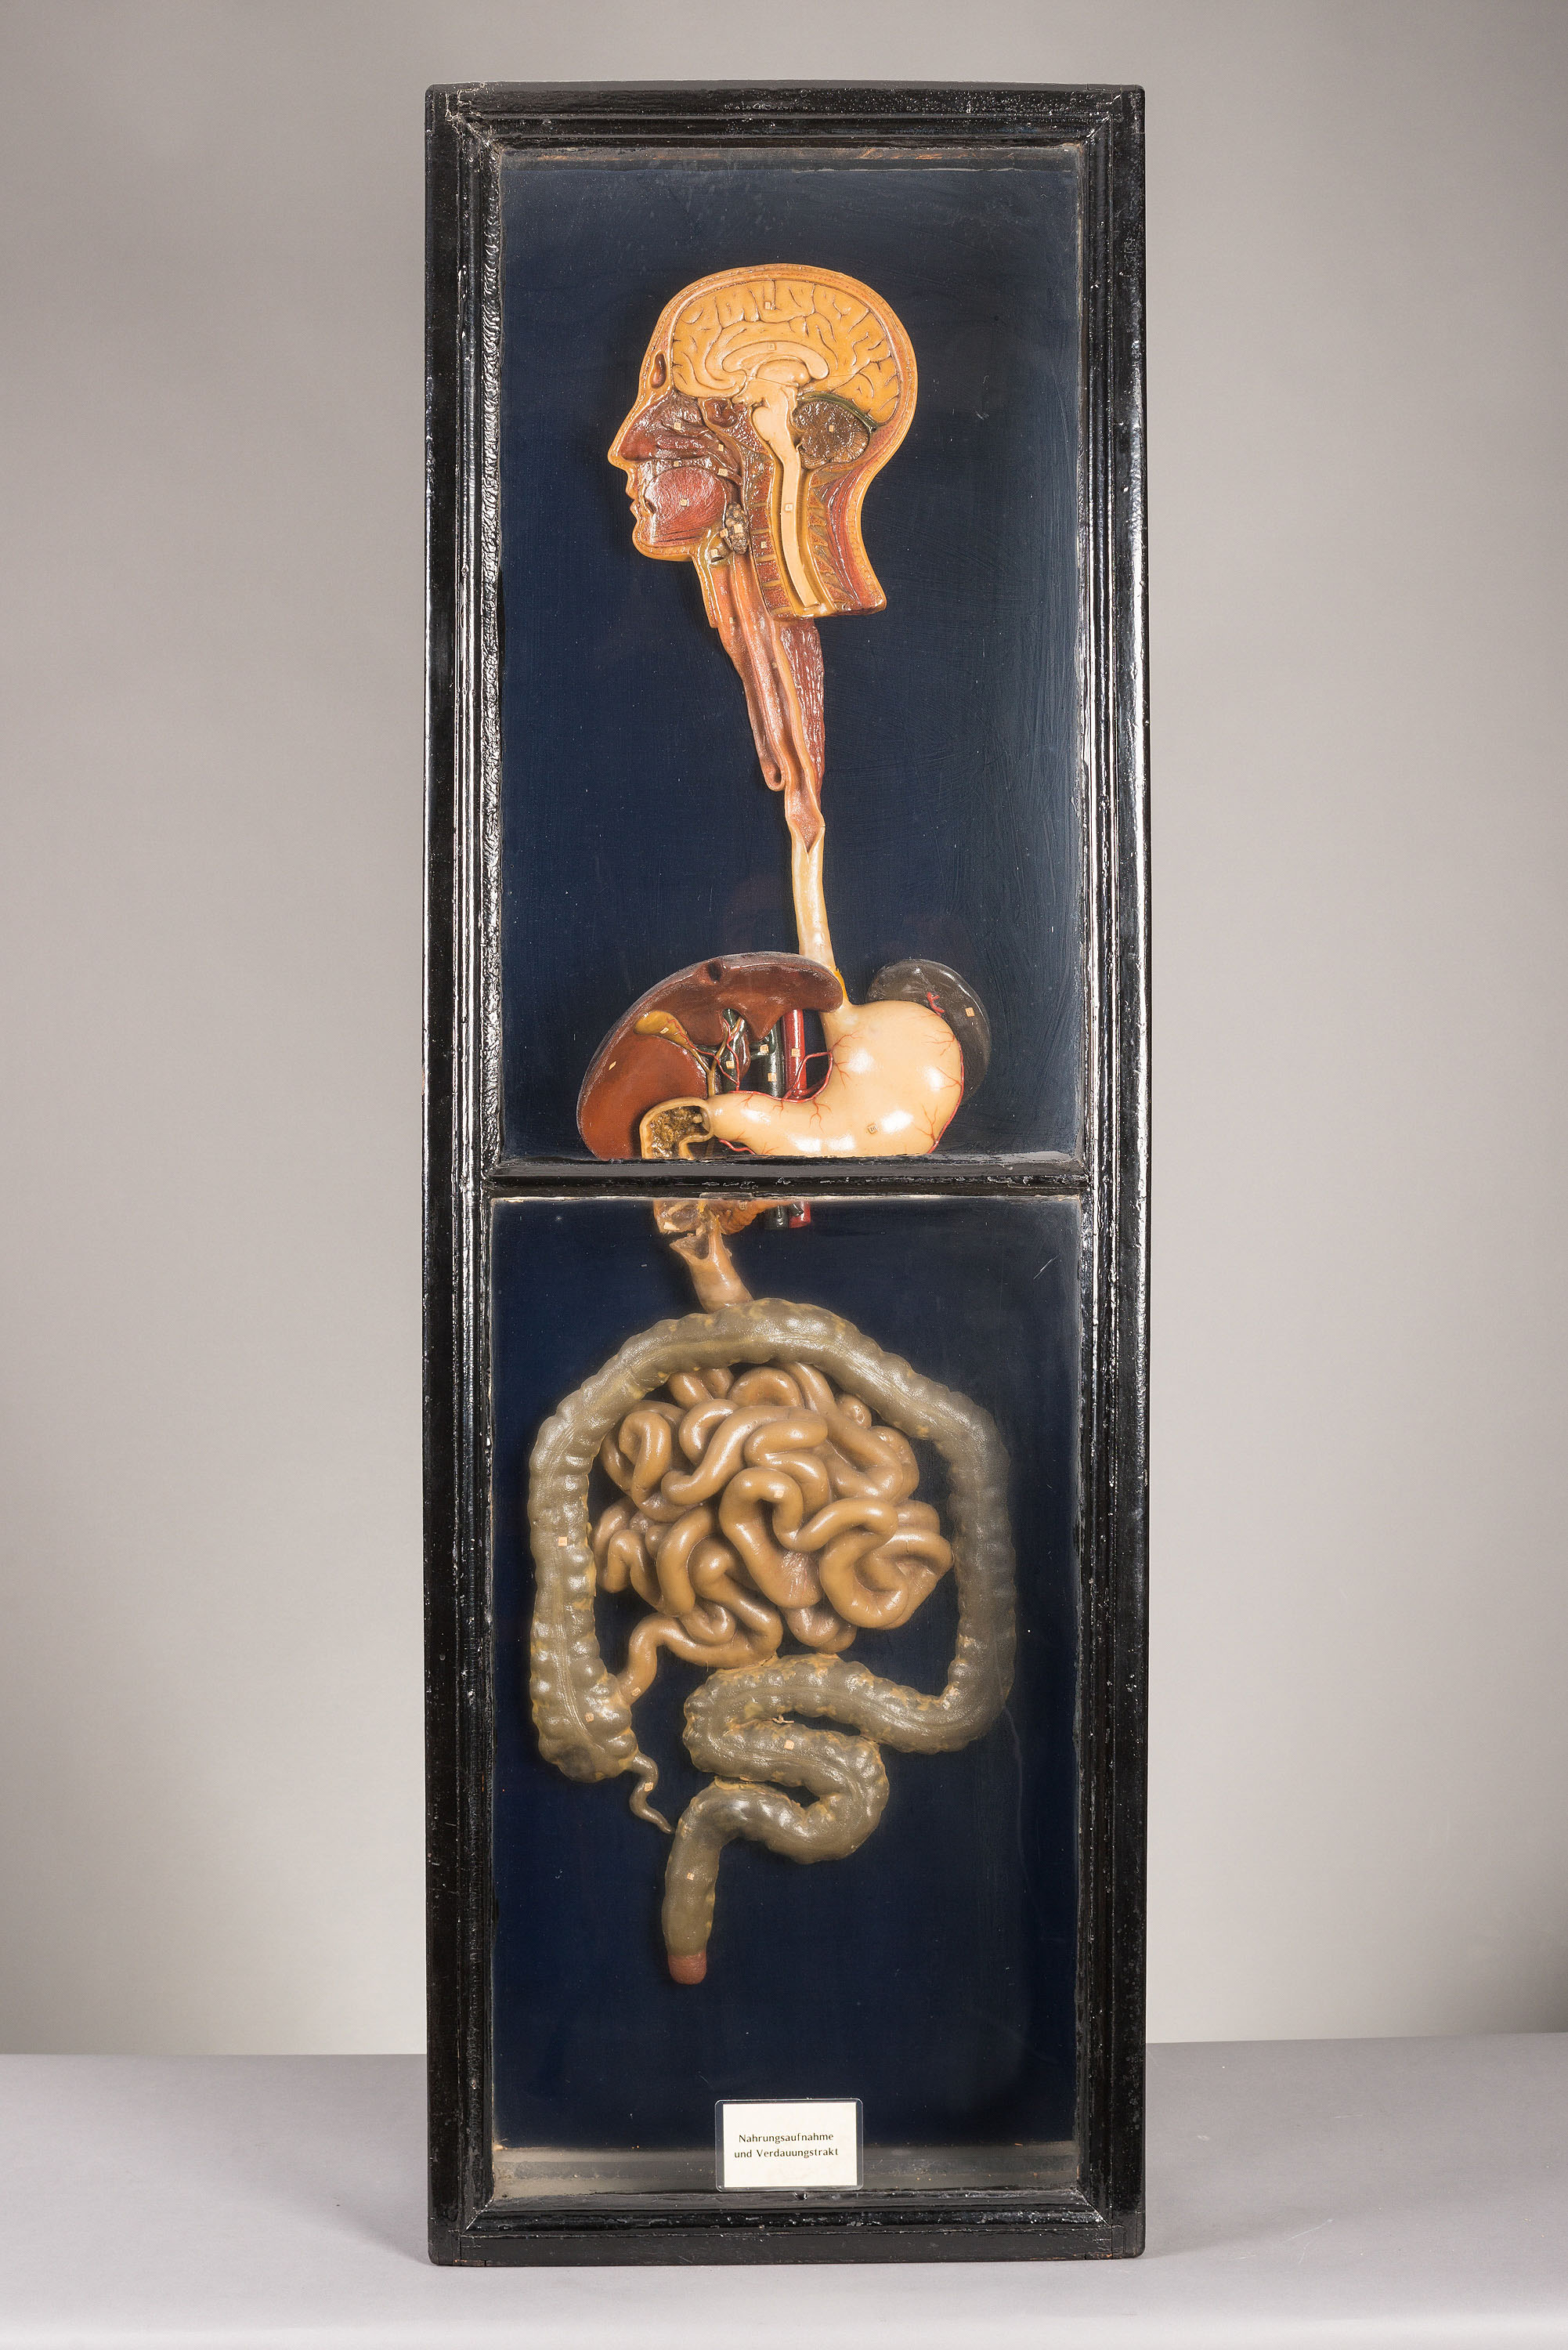 Wax model of food and digestive tract